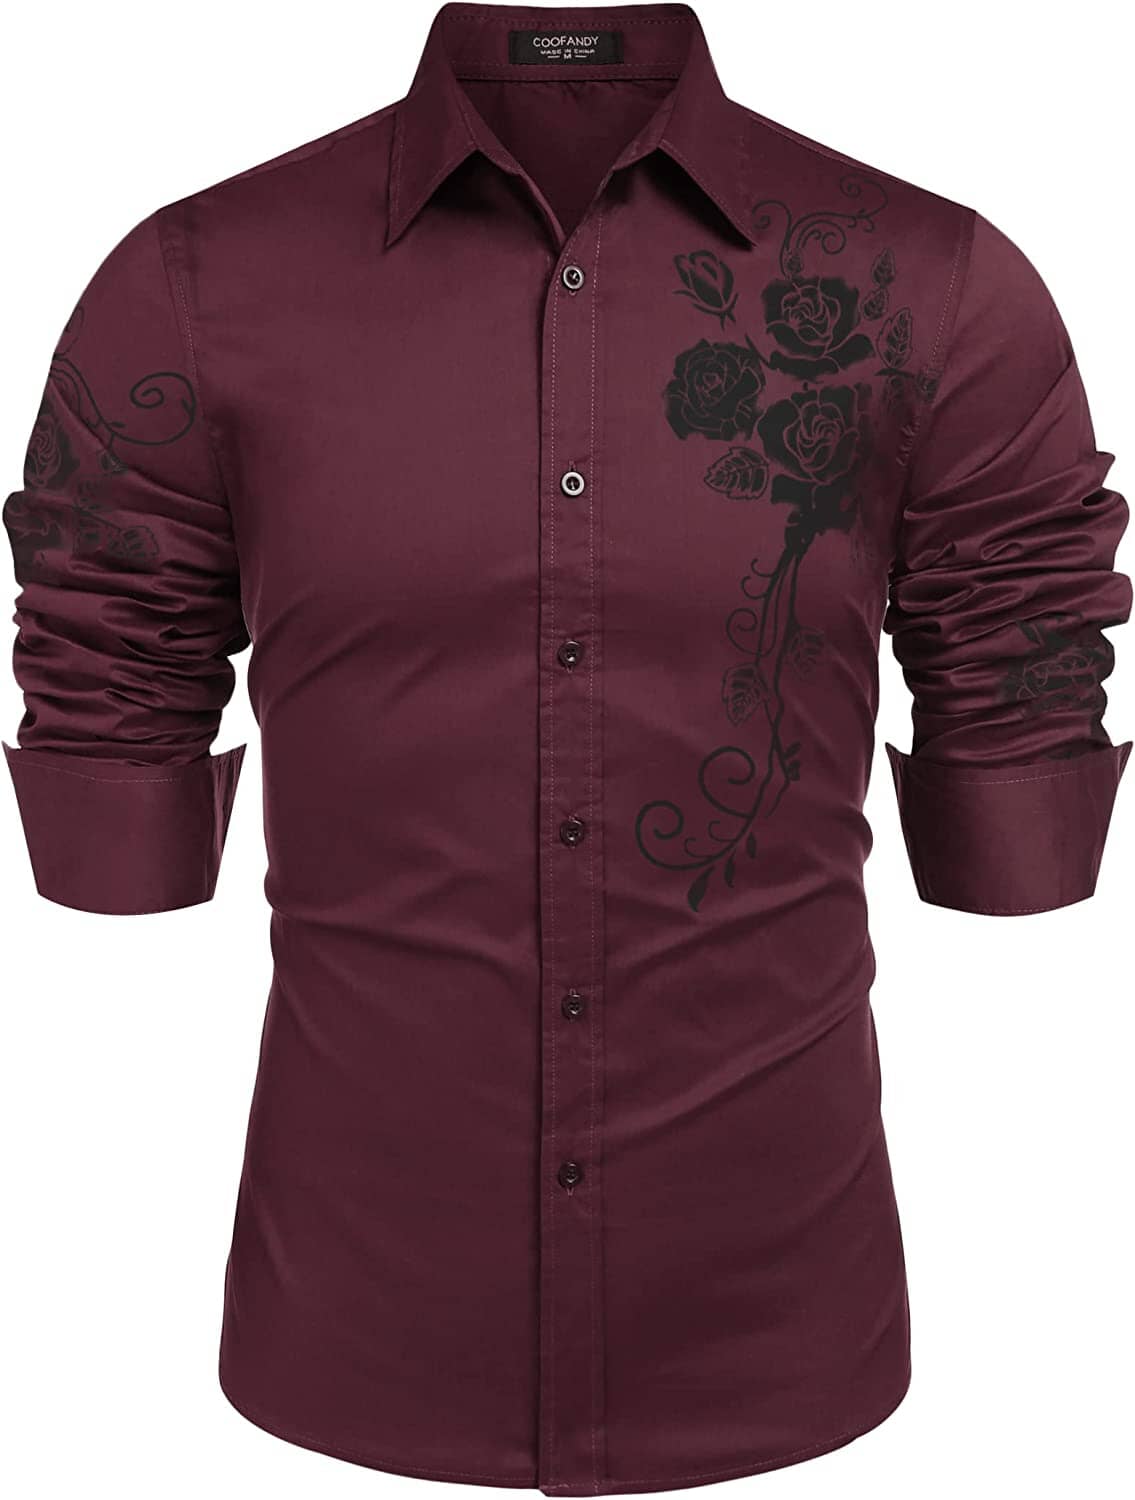 Rose Printed Slim Fit Dress Shirts (US Only) Shirts coofandy Wine Red S 